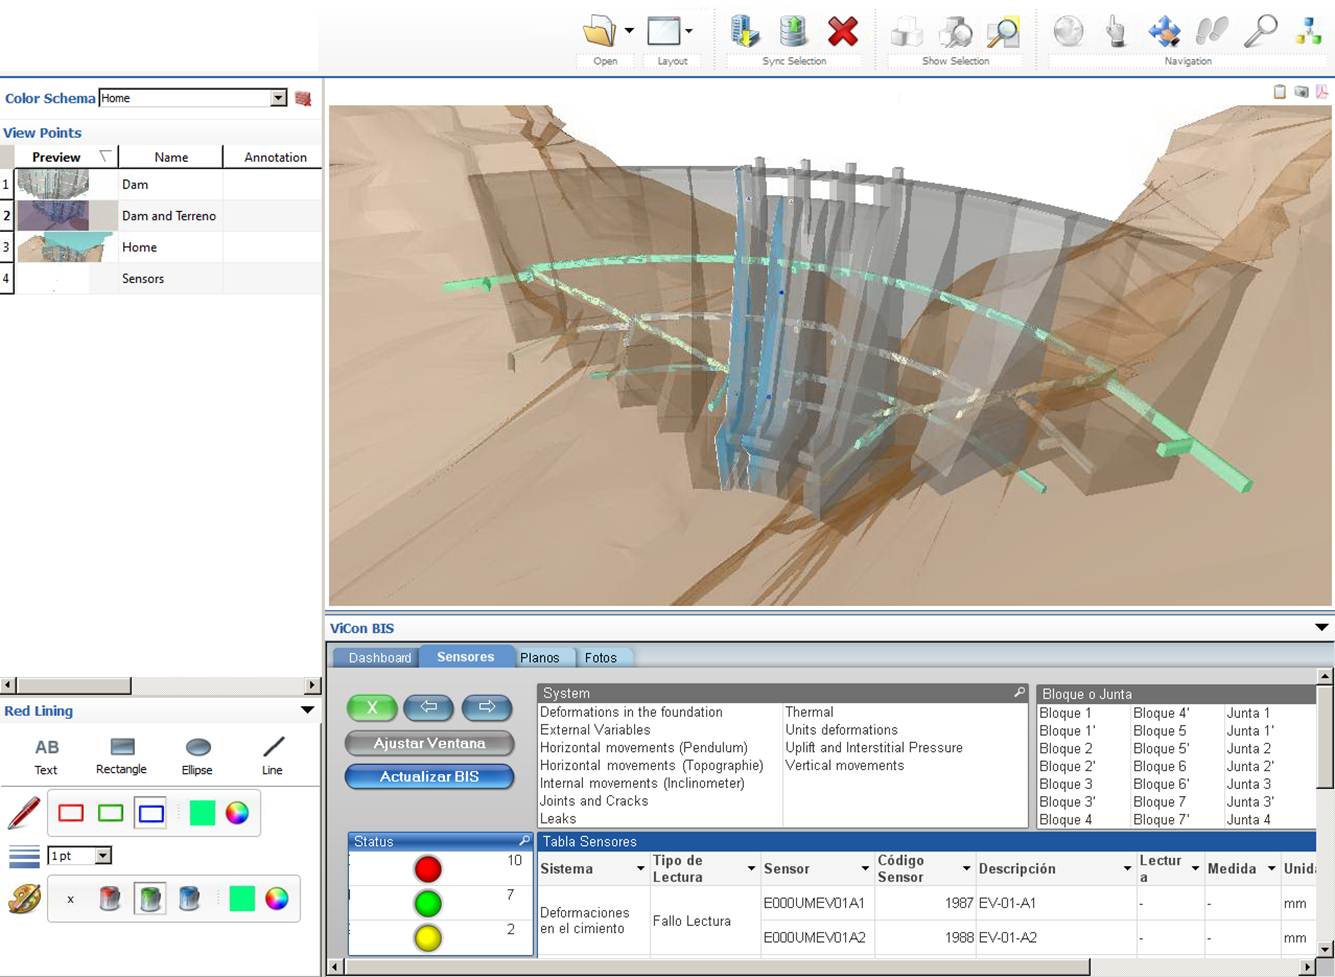 NEW STRUCTURAL HEALTH MONITORING TECHNIQUES INTEGRATED WITH BIM